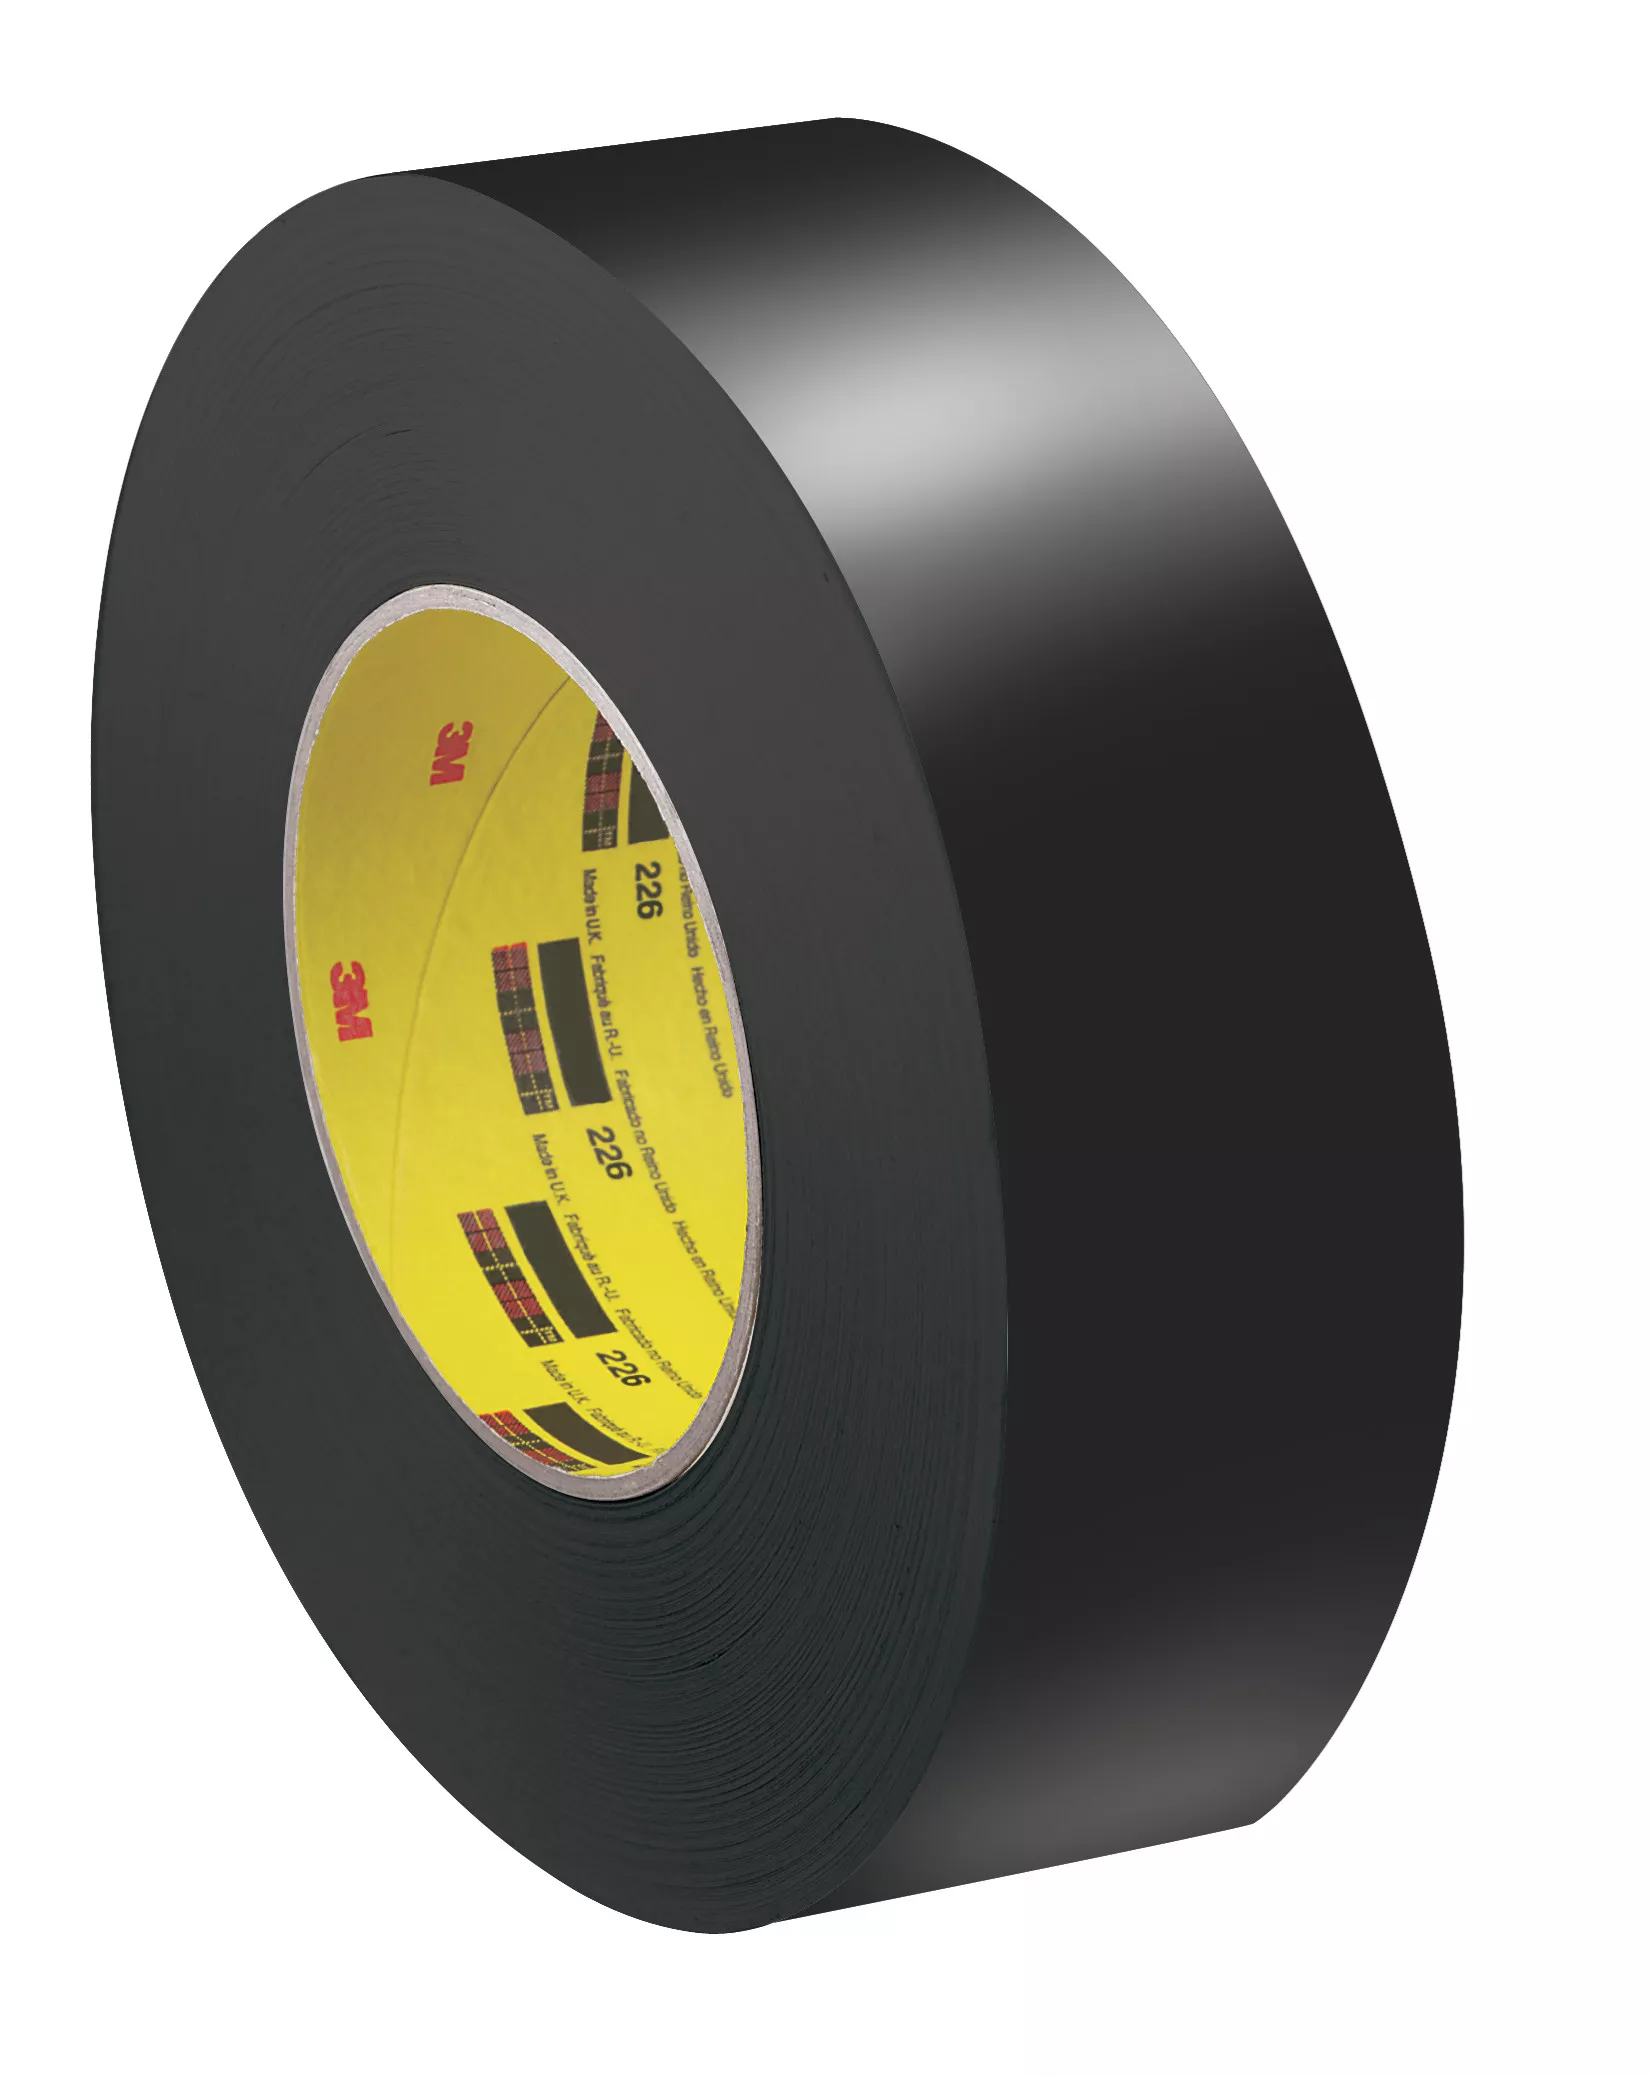 Scotch® Solvent Resistant Masking Tape 226, Black, 1/2 in x 60 yd, 10.6
mil, 72 Roll/Case